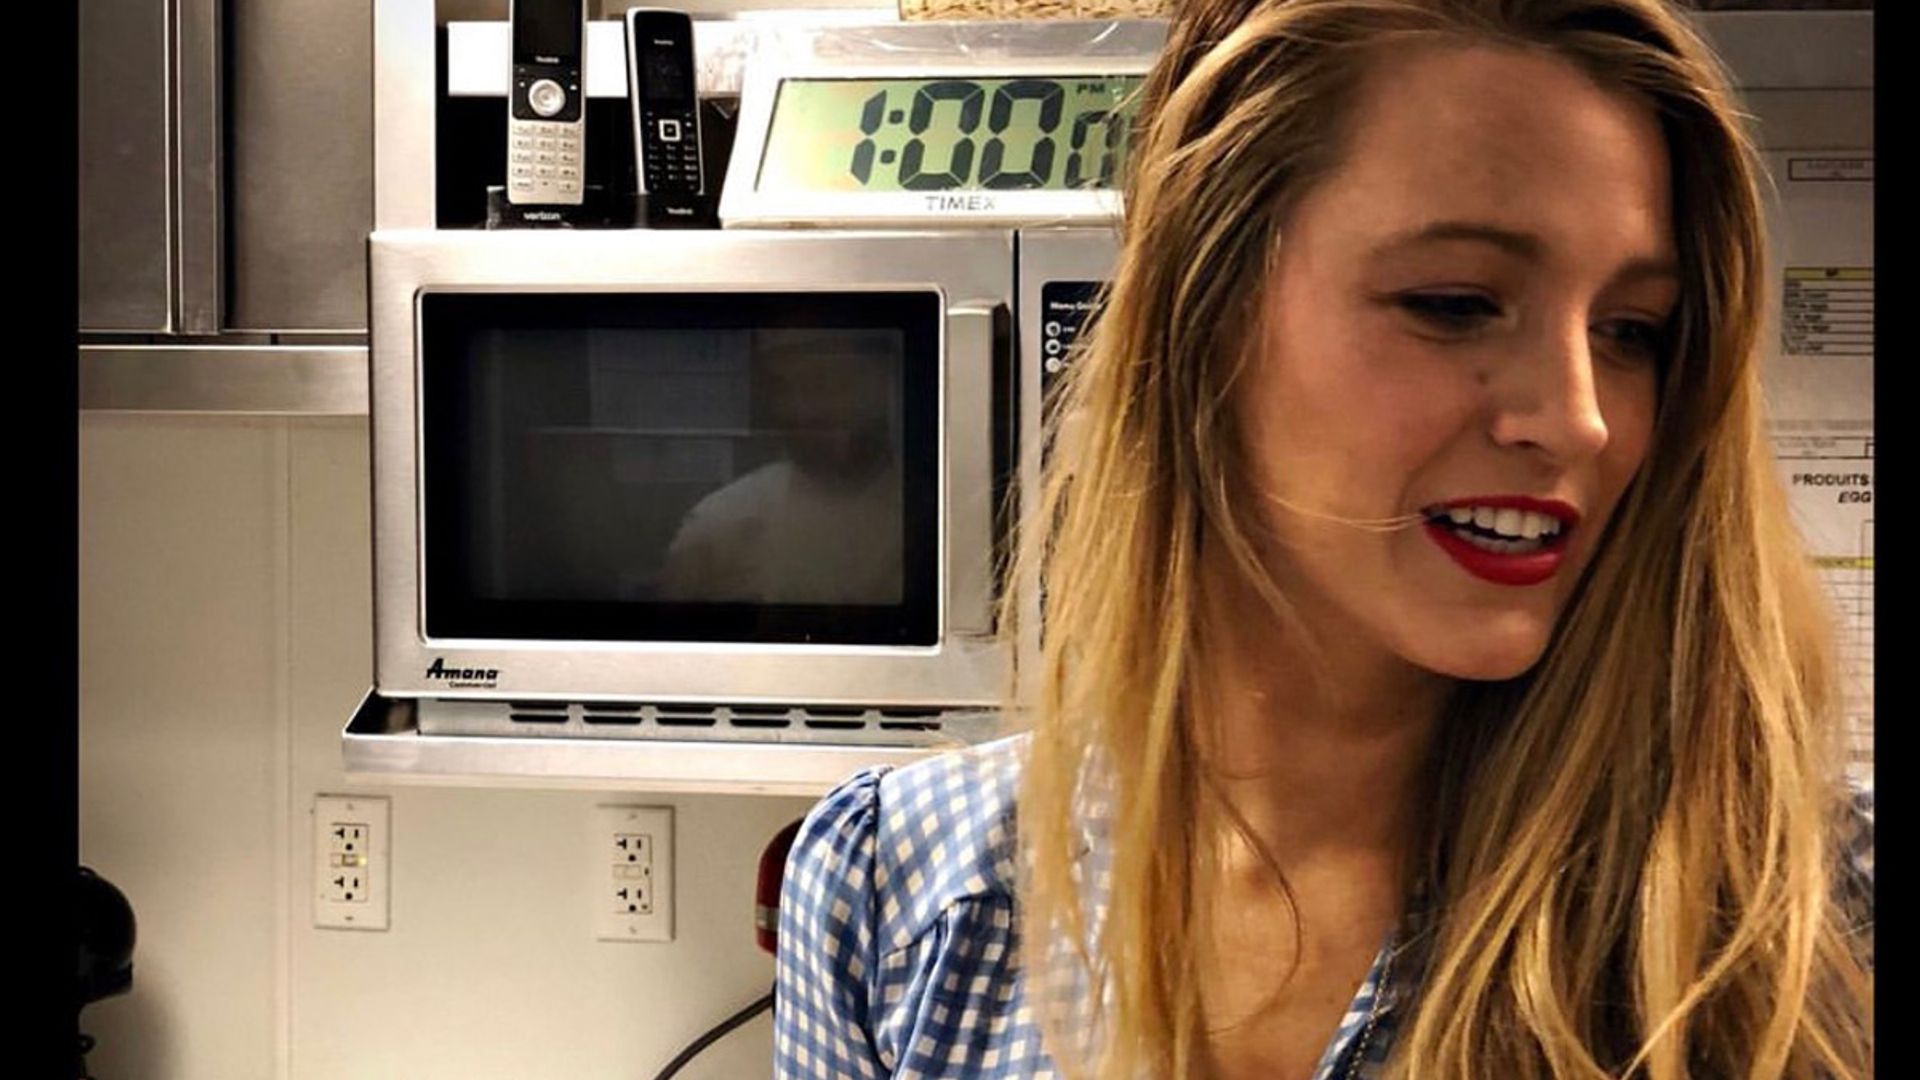 Blake Lively's incredible unicorn cake is perfect for her three young daughters